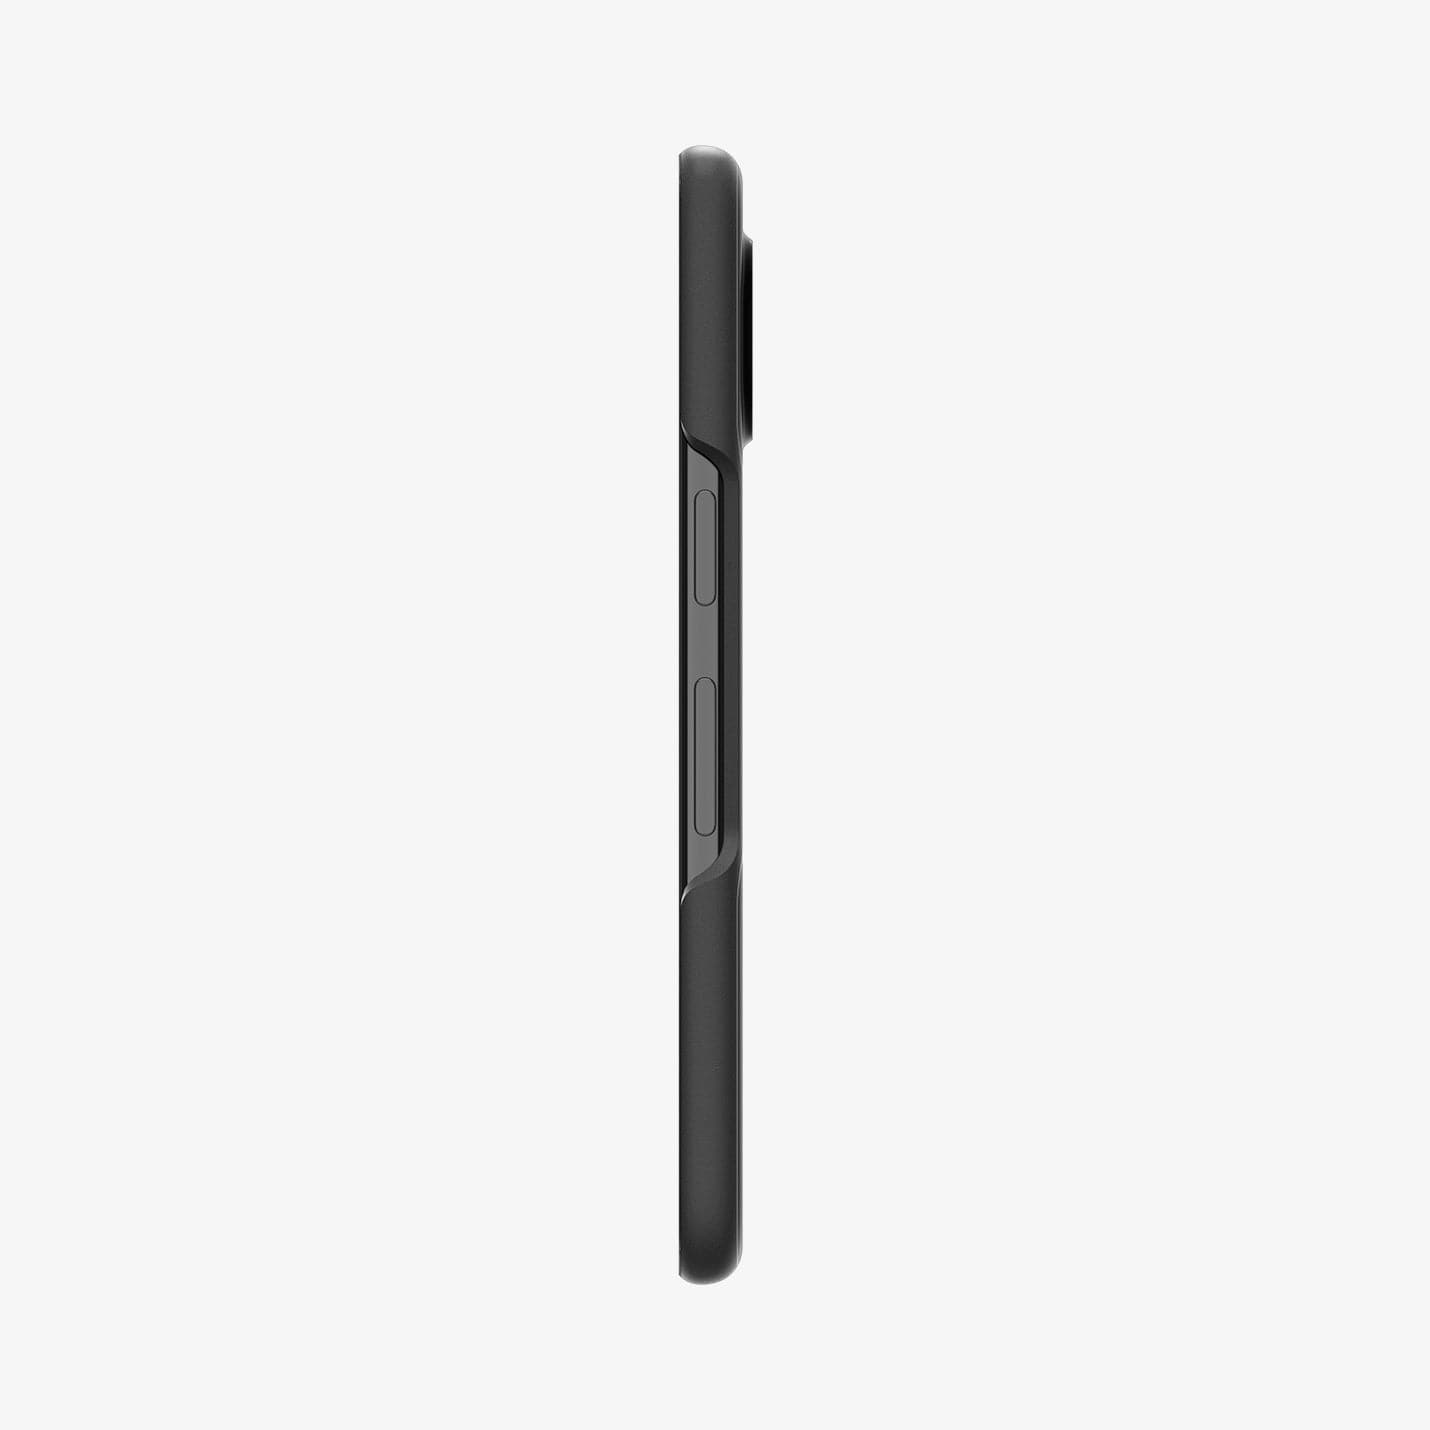 ACS05919 - Pixel Fold Series Case Thin Fit in black showing the side with volume controls